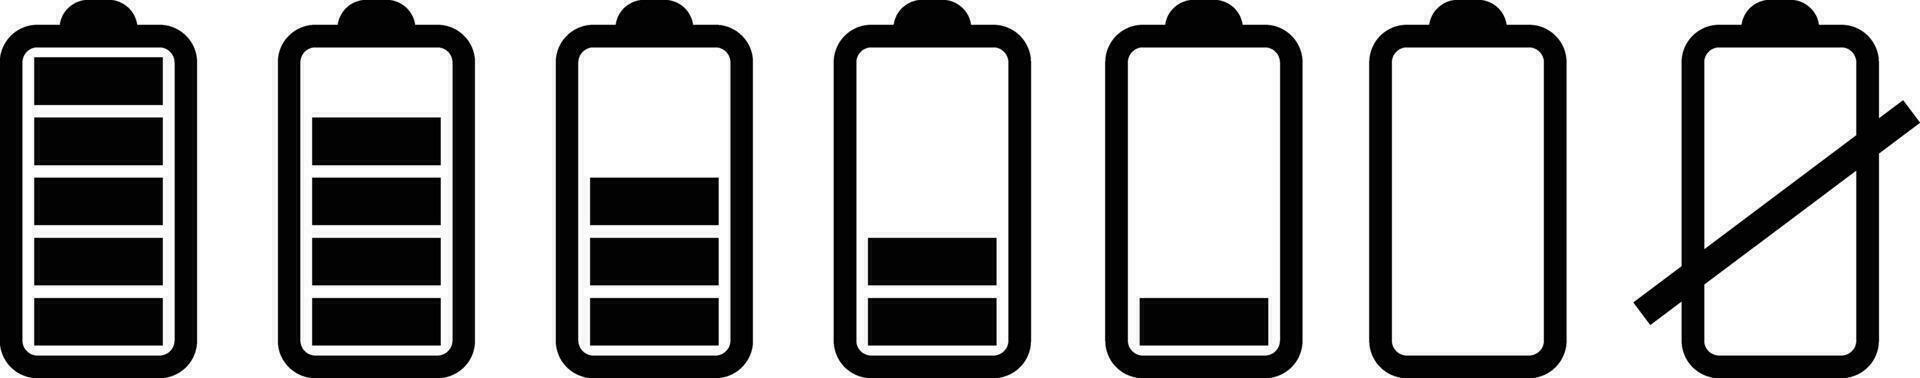 Battery icon in flat design set. isolated on transparent background ...